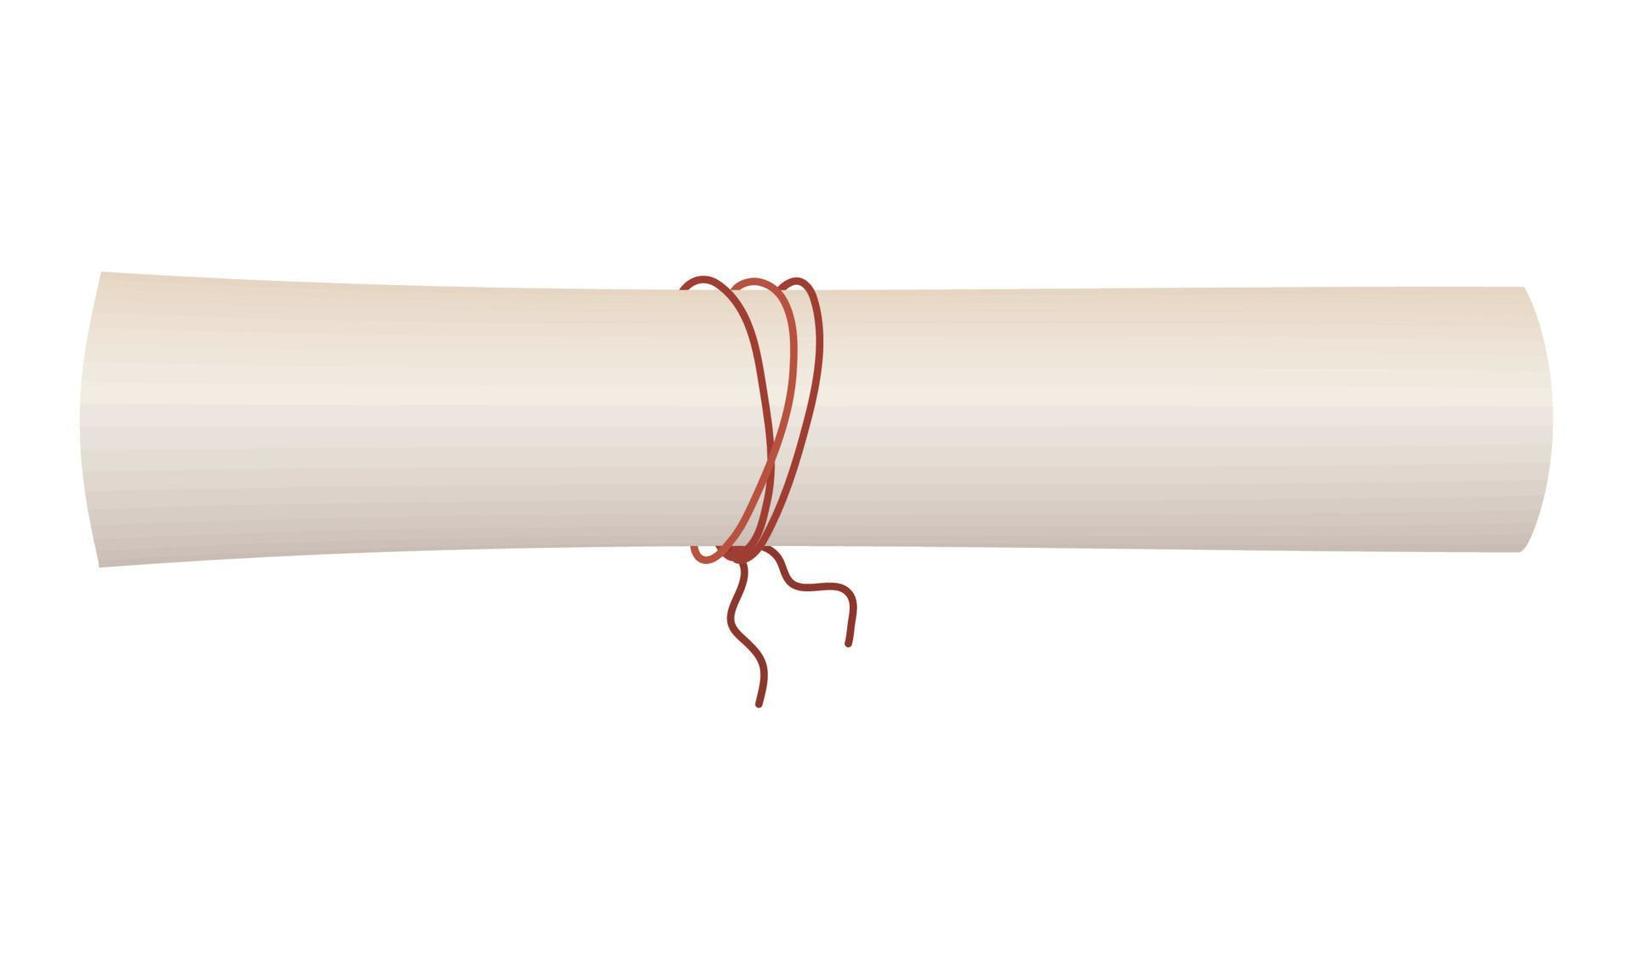 graduation diploma with red rope vector